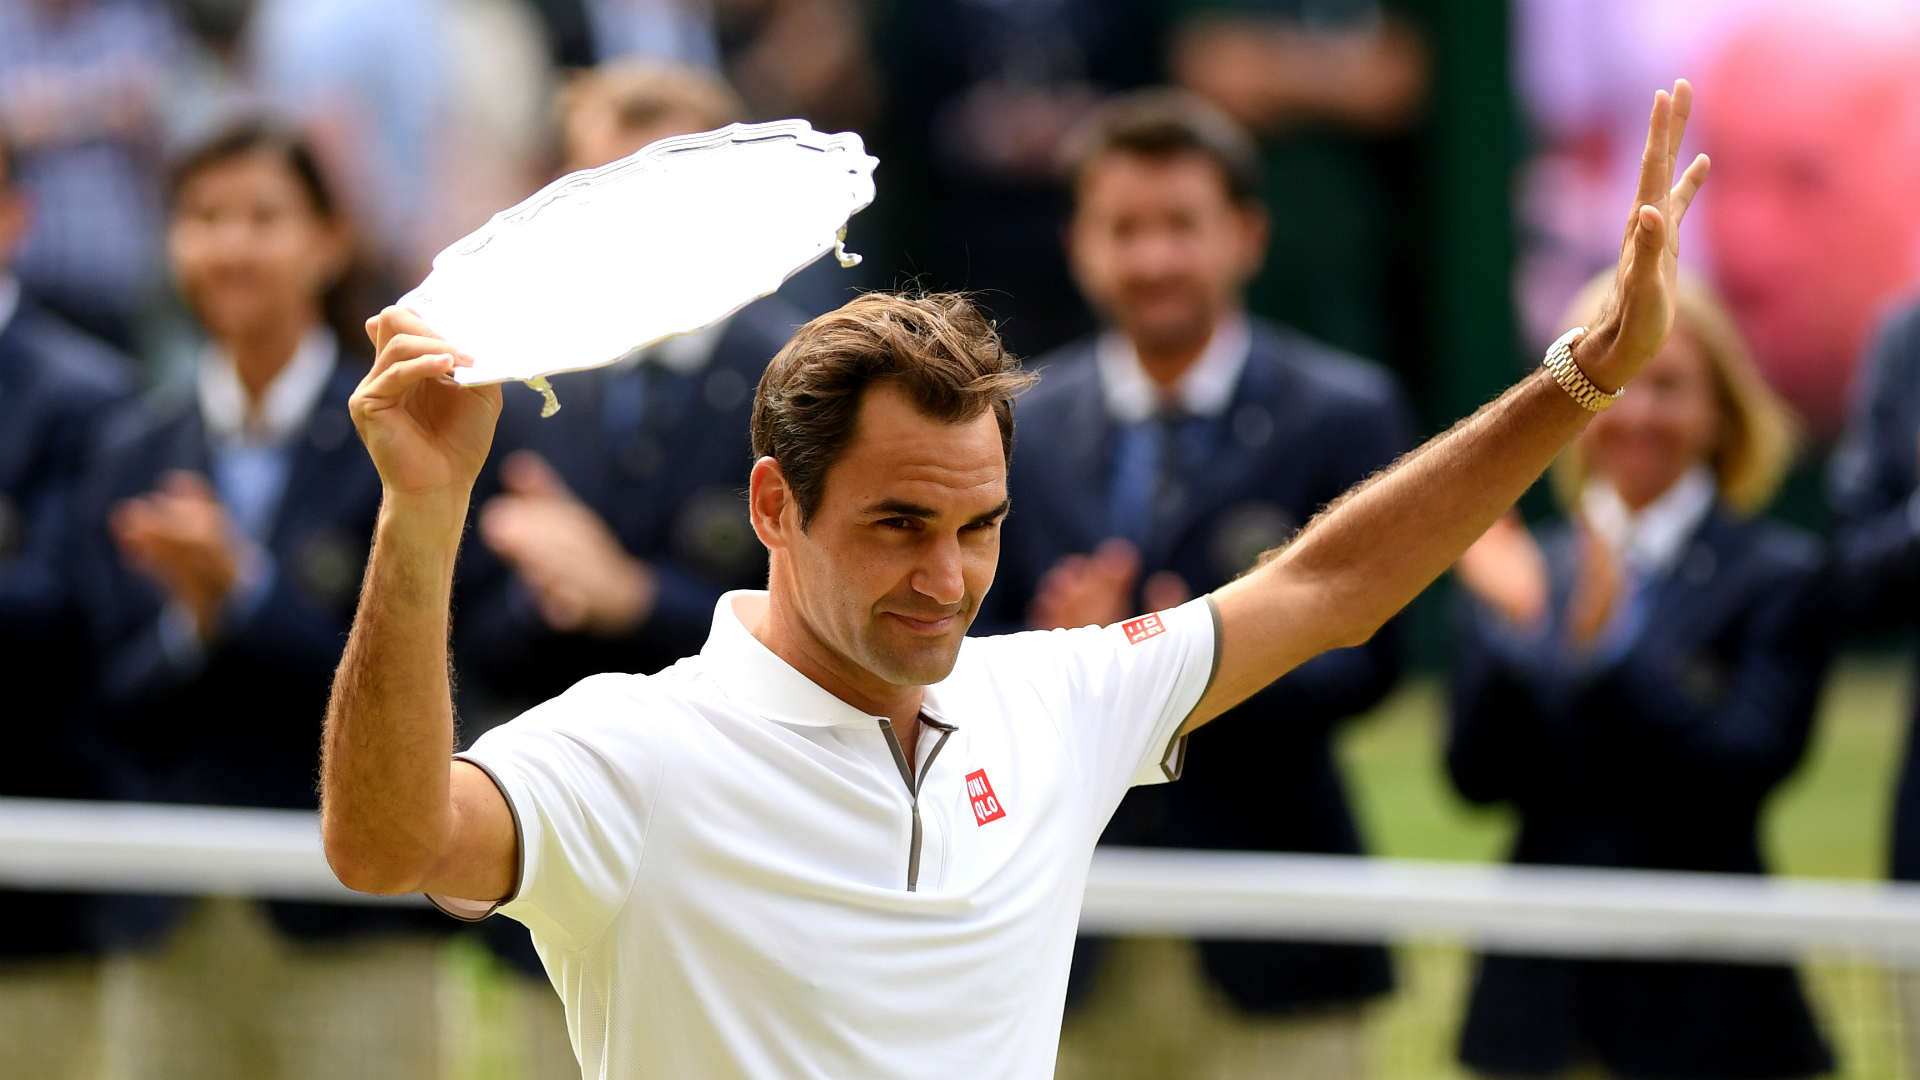 Flipboard: Wimbledon 2019 Results: Men's Final Score and Early US Open Predictions